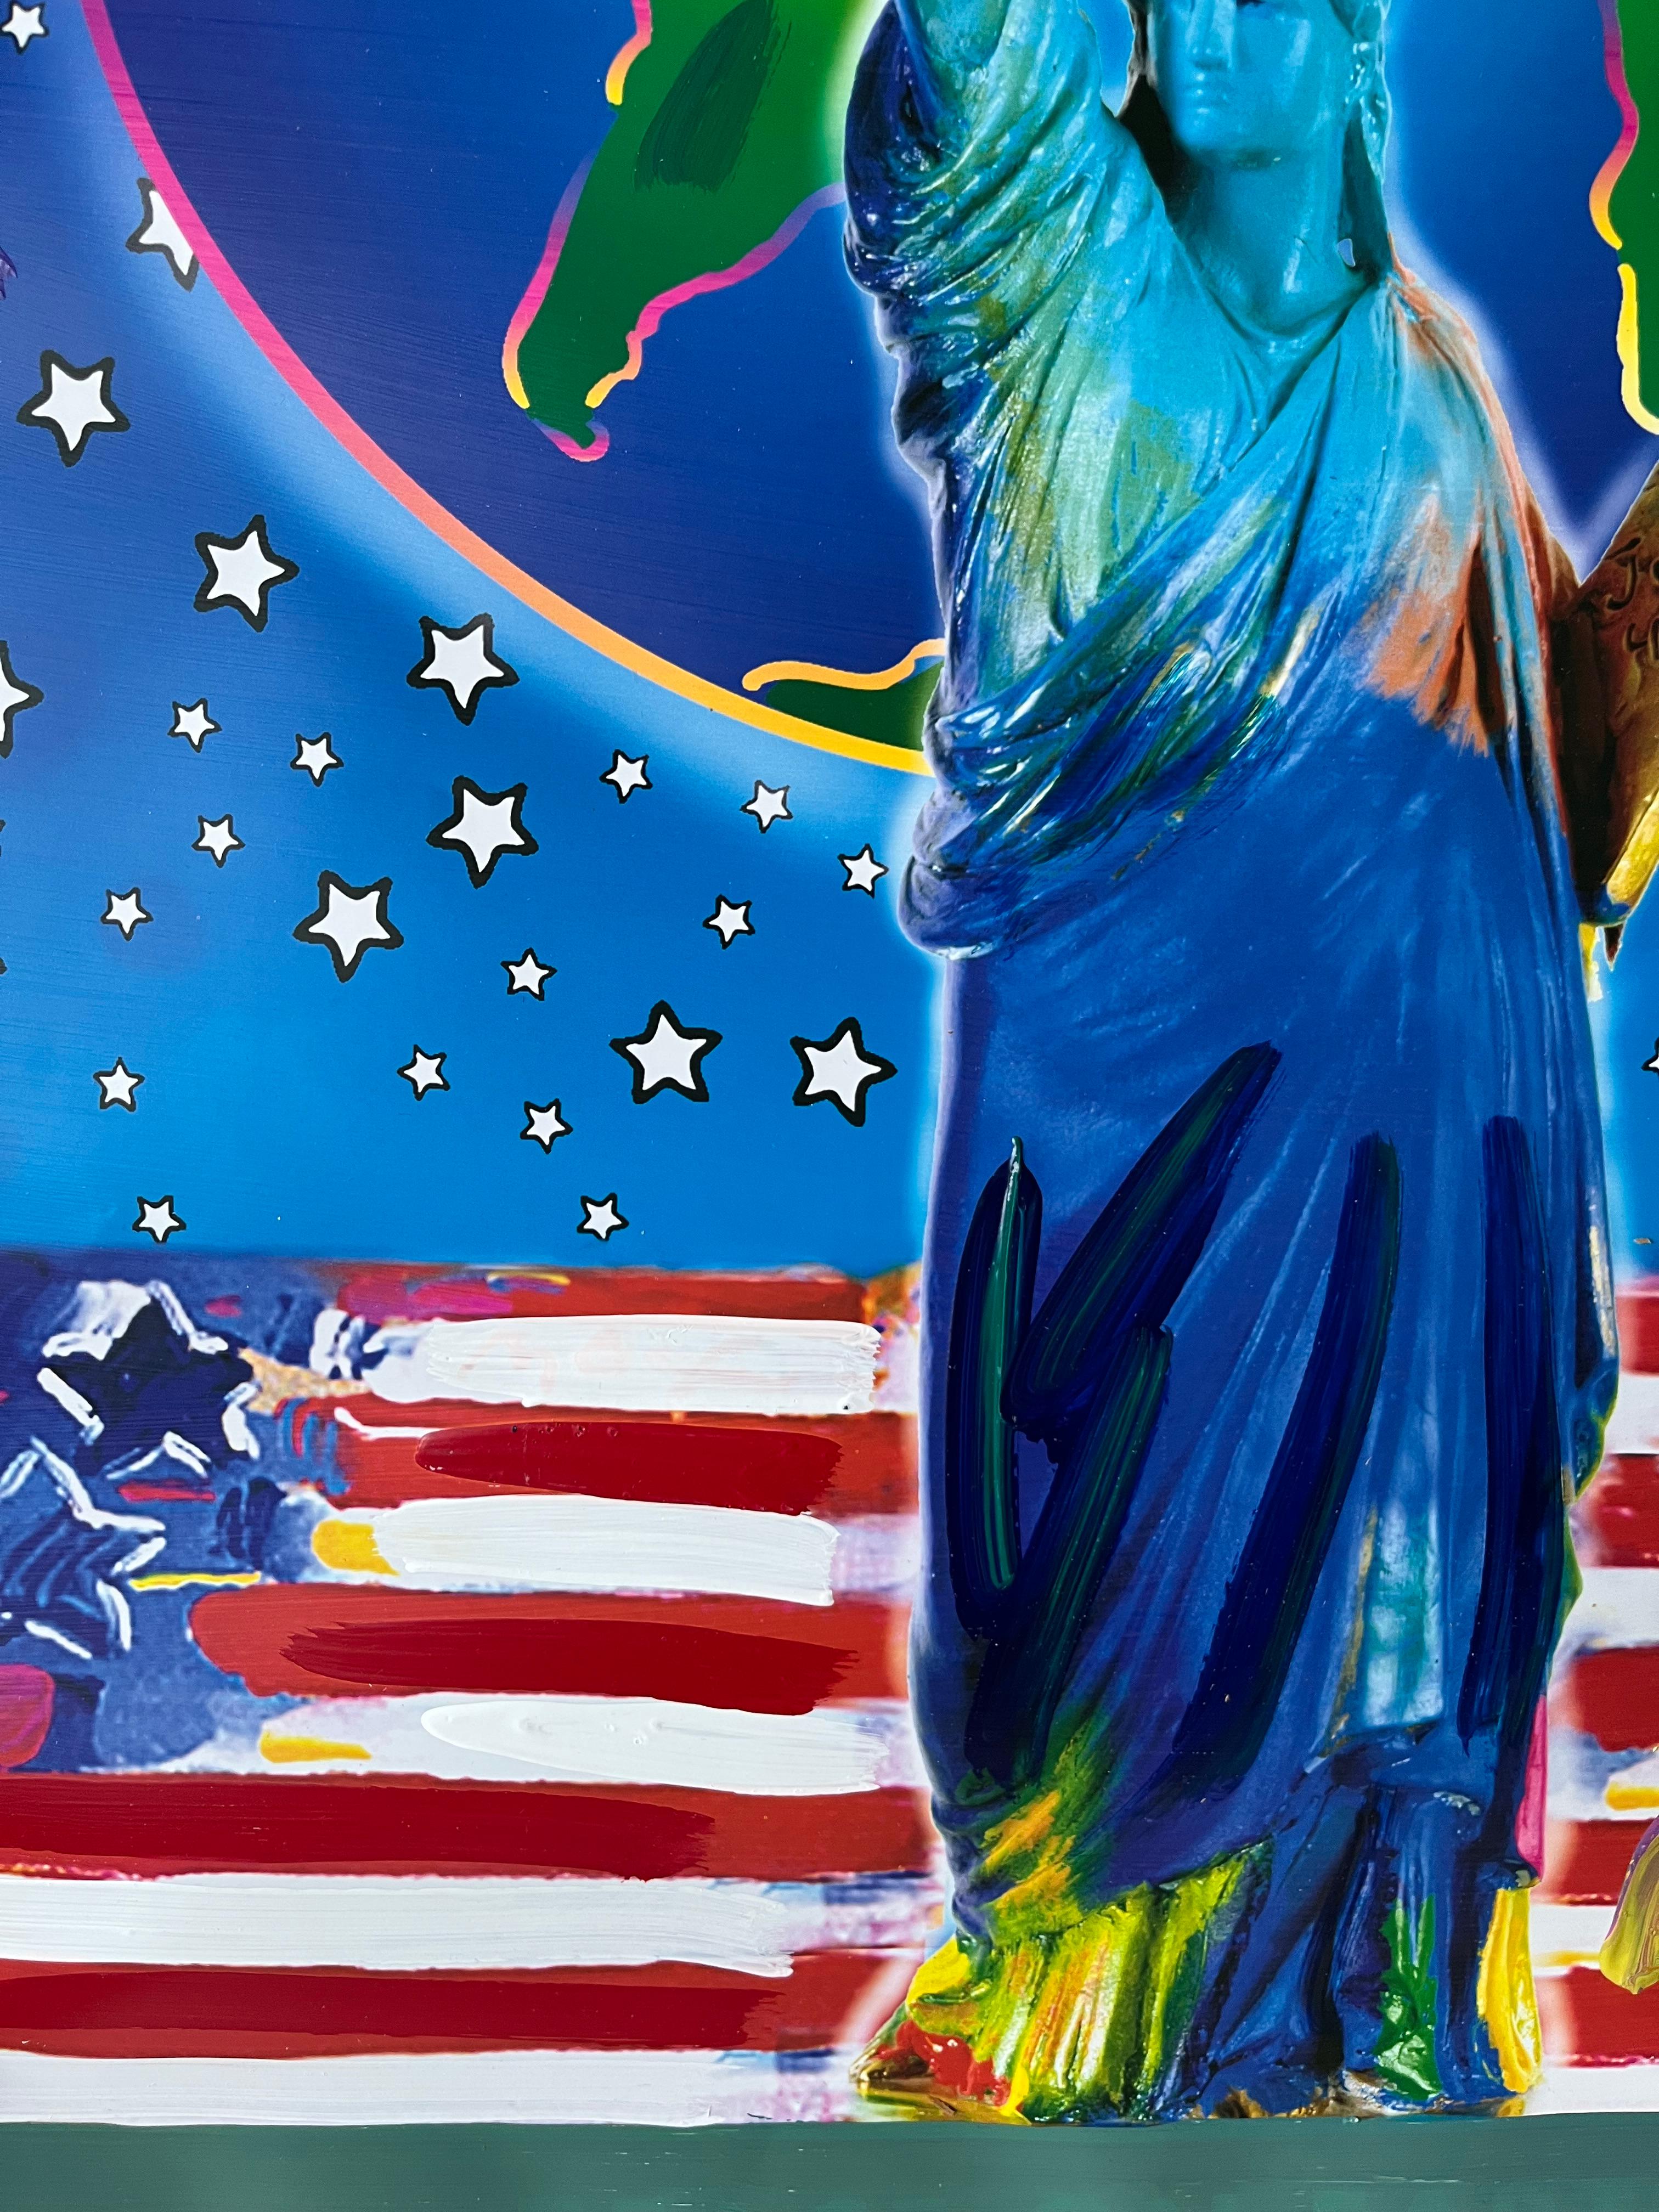 Peace on Earth - Pop Art Art by Peter Max